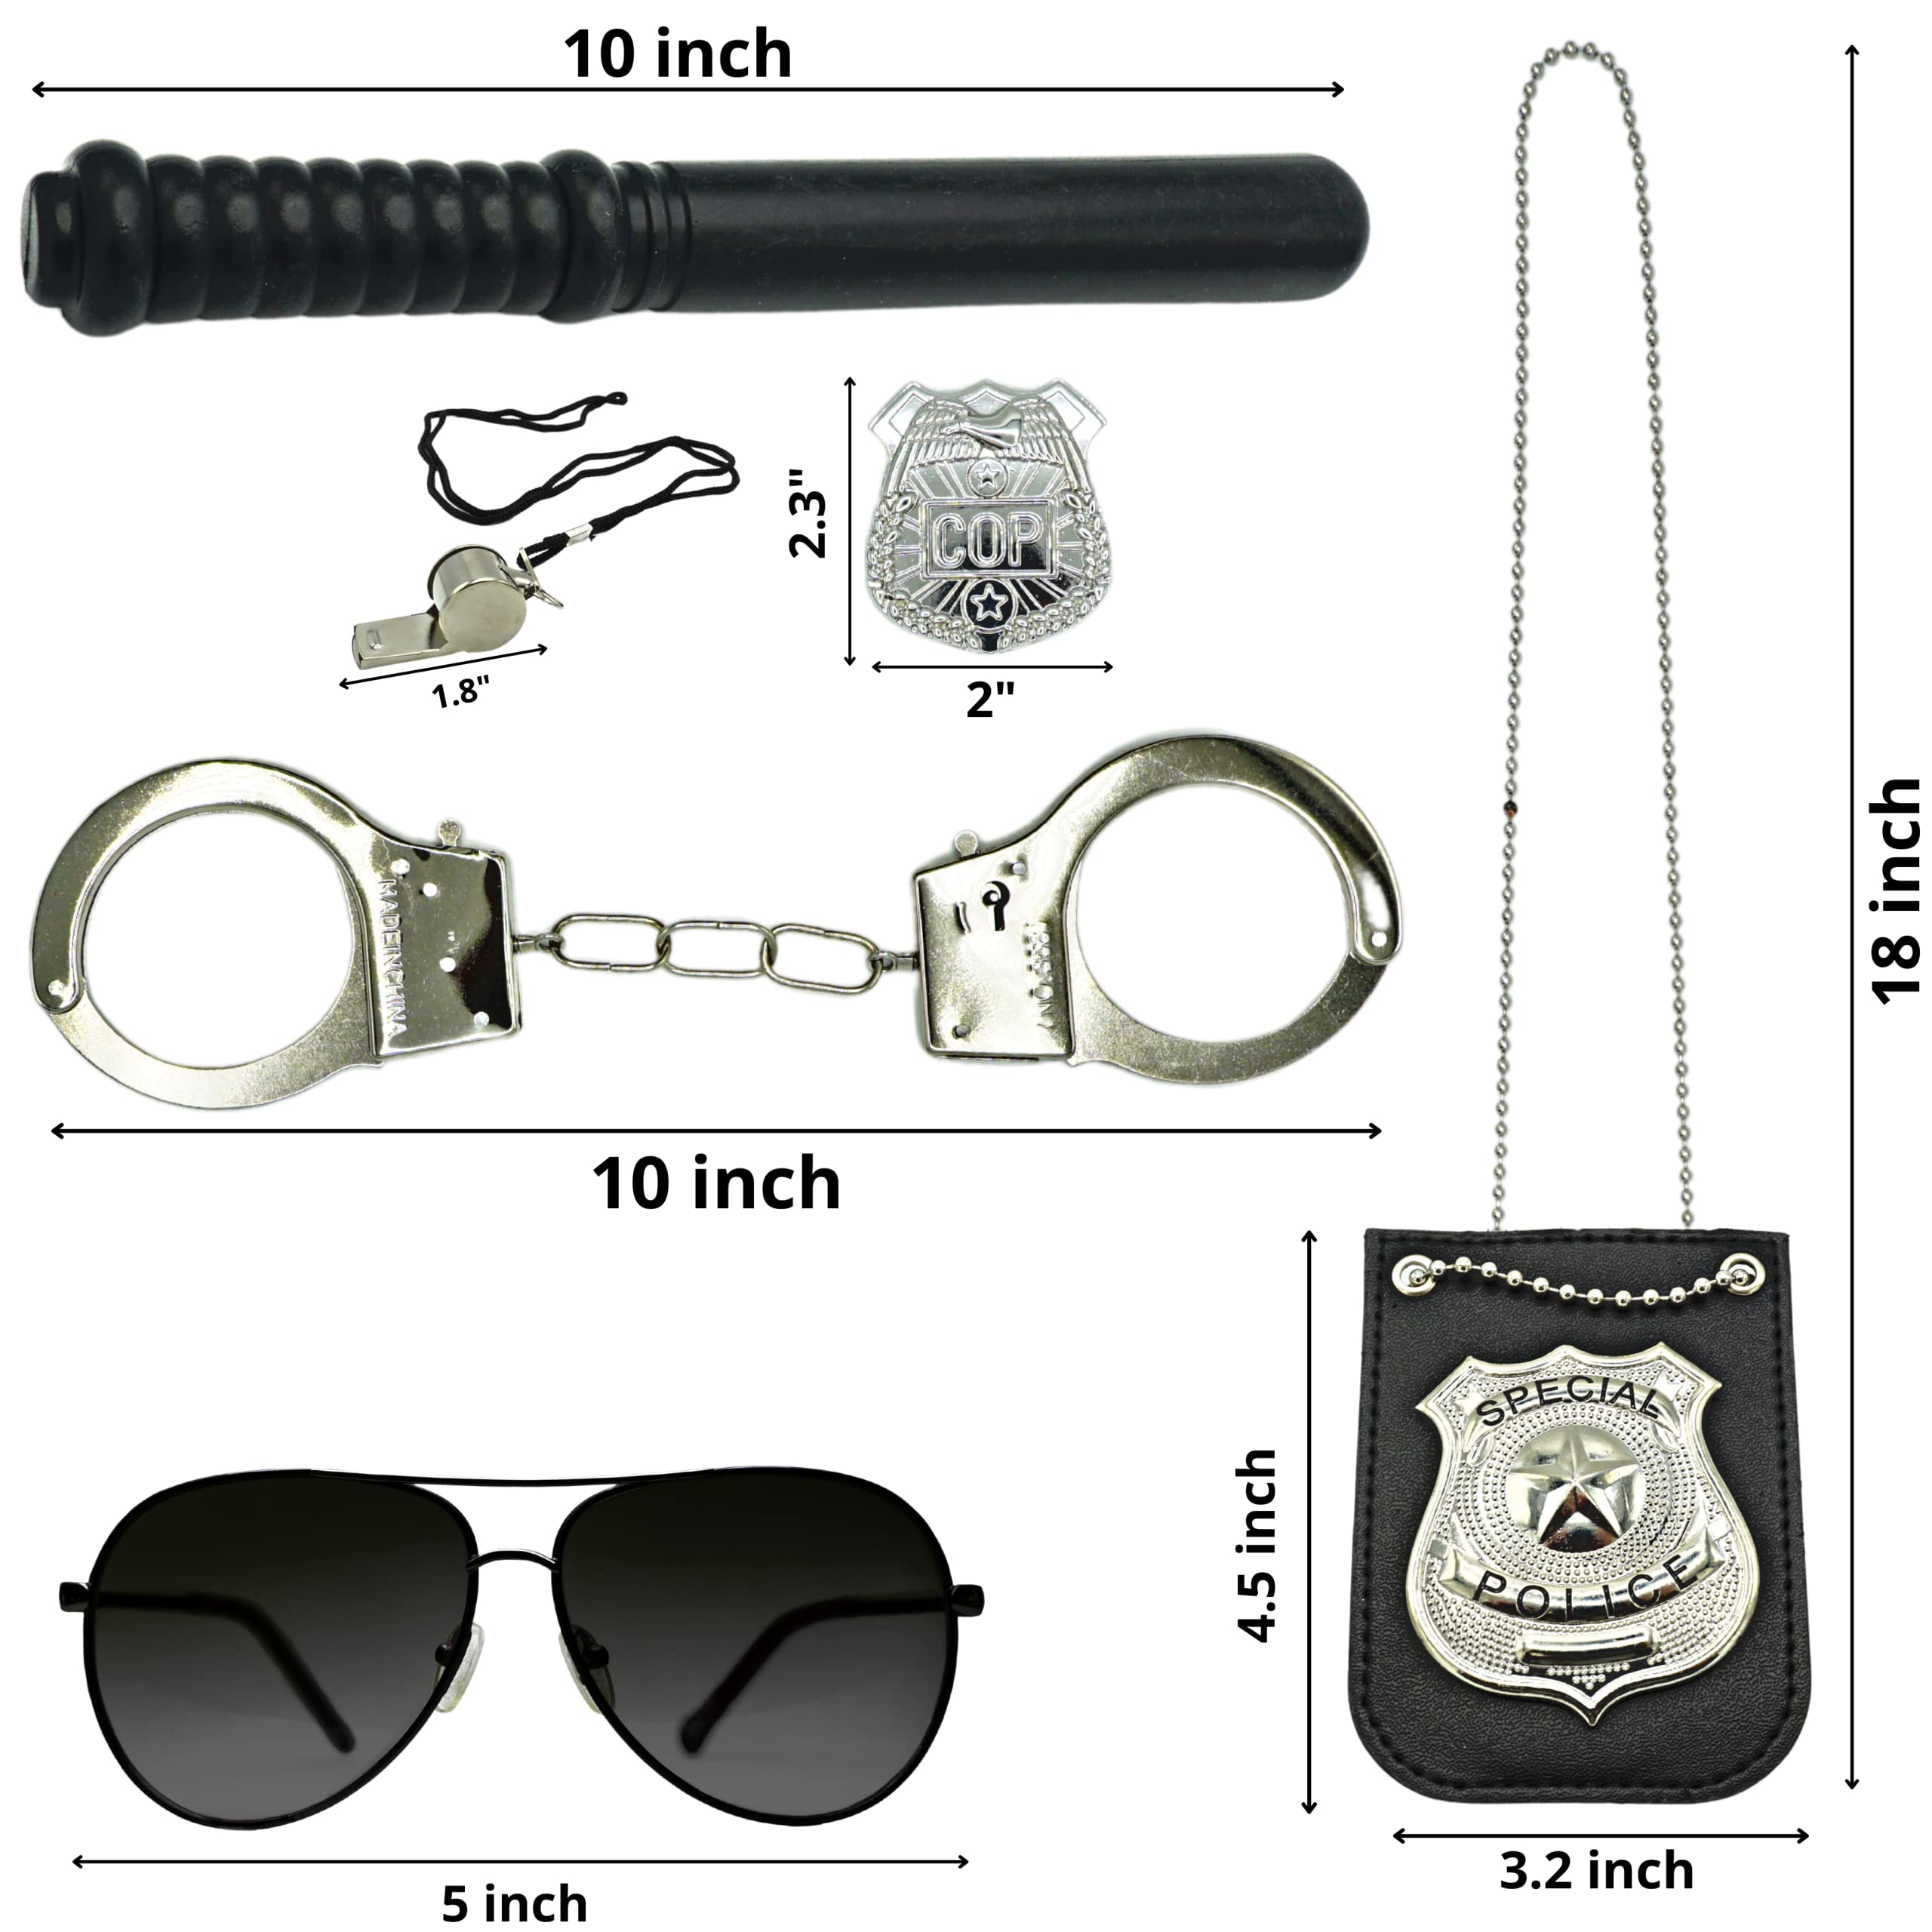 6 Pcs Set Police Accessories for Kids - Police Baton, Badge, Handcuffs, Whistle, Sunglasses, Cop Badge, Police Gear for Pretend Play, Dress Up, Christmas Gift & Stocking Stuffer by 4E's Novelty